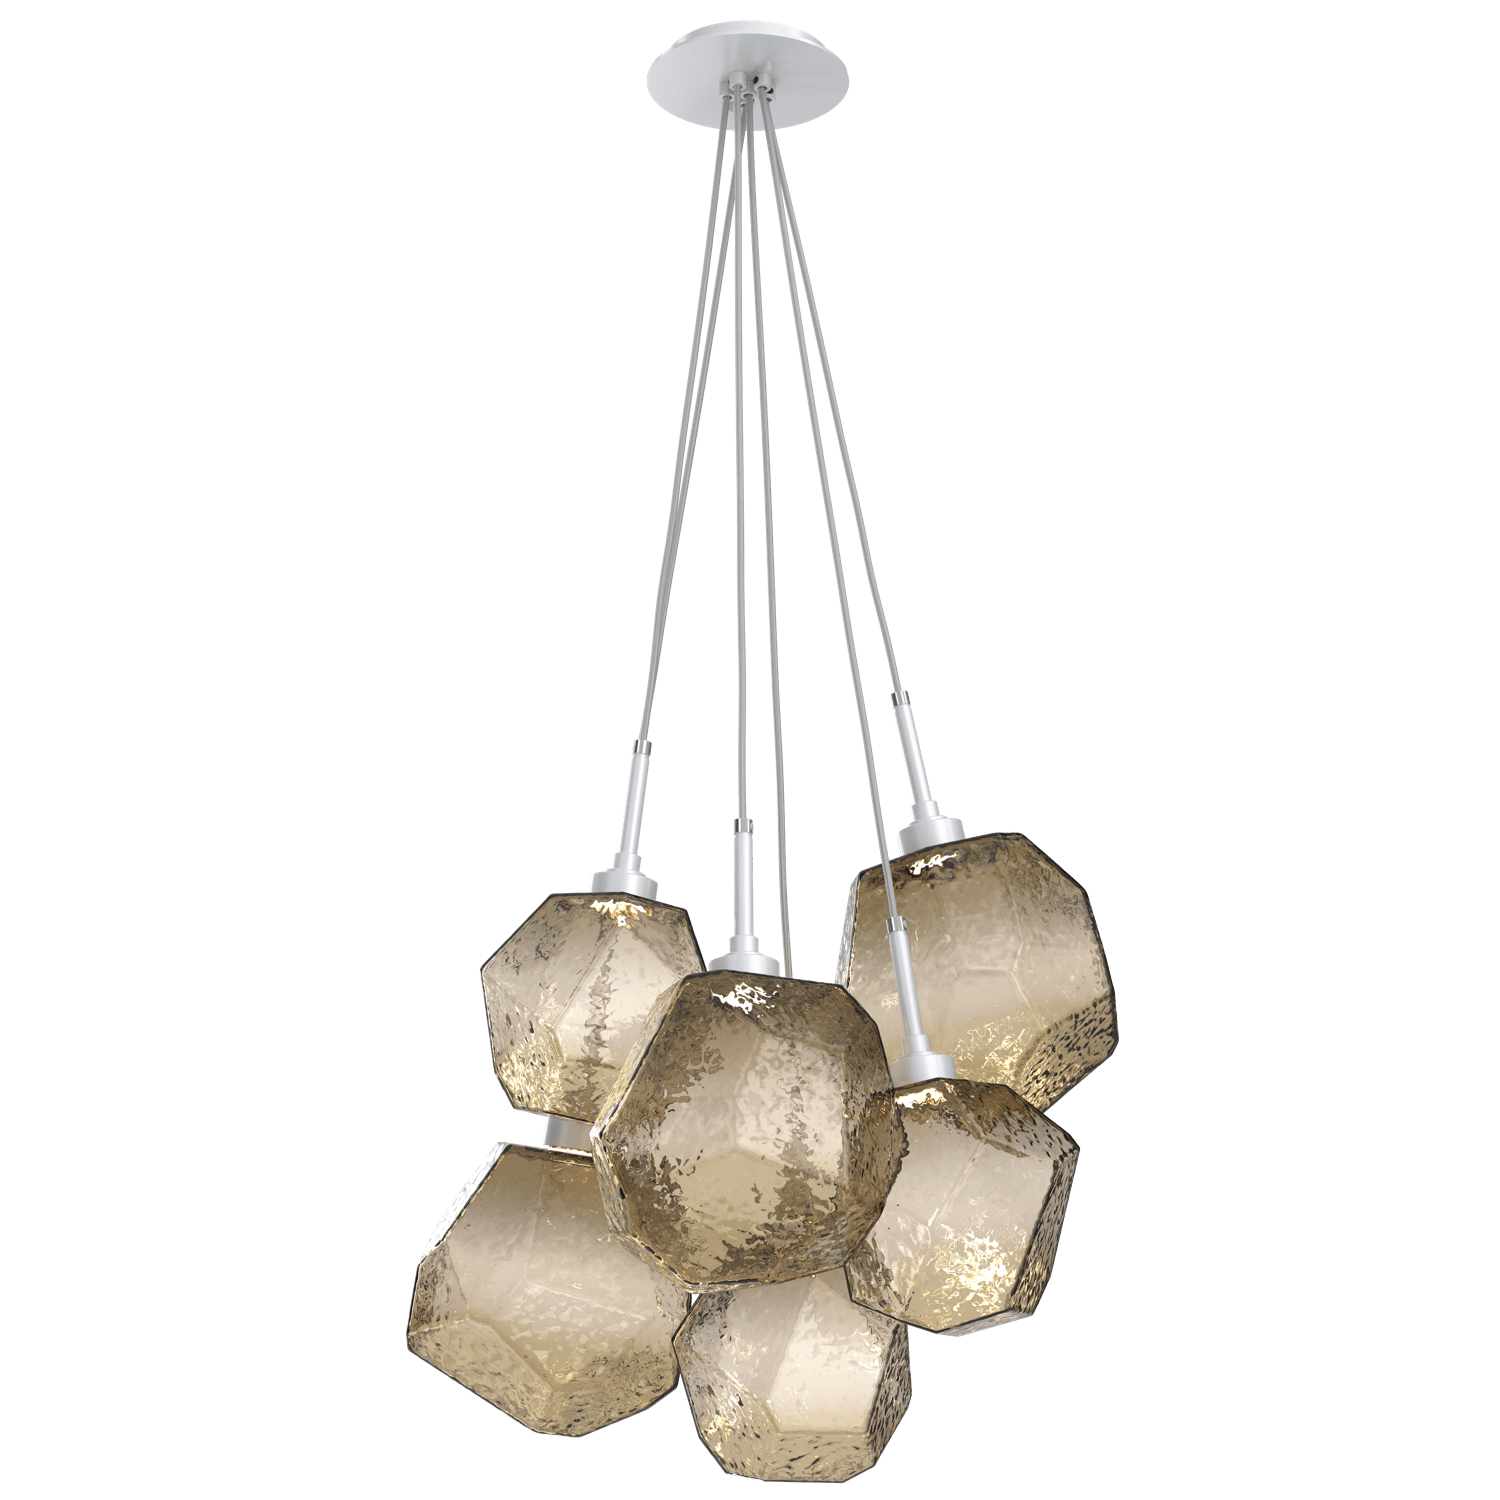 CHB0039-0F-CS-B-Hammerton-Studio-Gem-6-light-cluster-pendant-light-with-classic-silver-finish-and-bronze-blown-glass-shades-and-LED-lamping